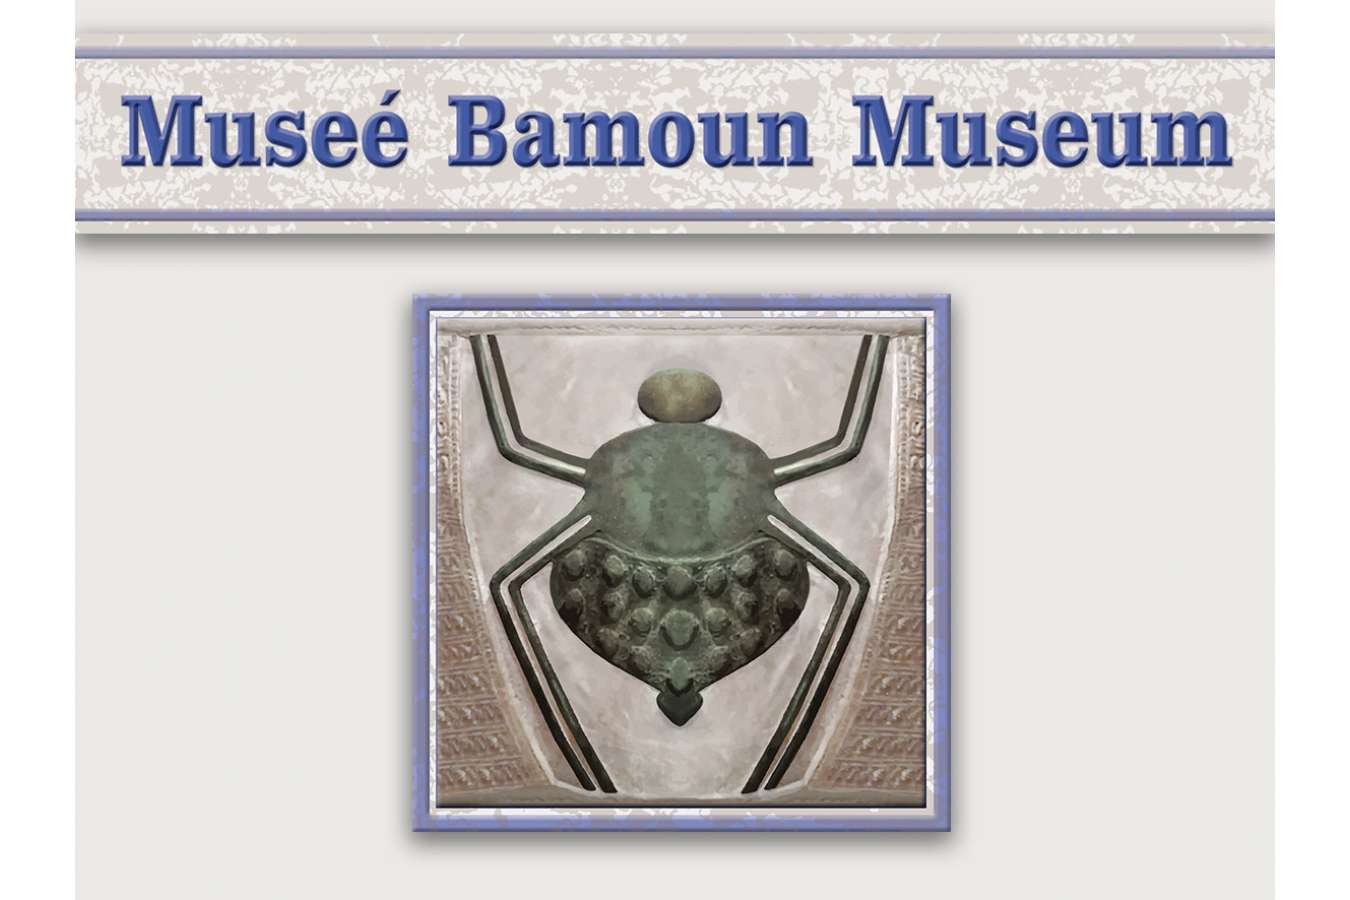 Bamoun Signs : Exterior signs for private museum showing the Royal art of Cameroon